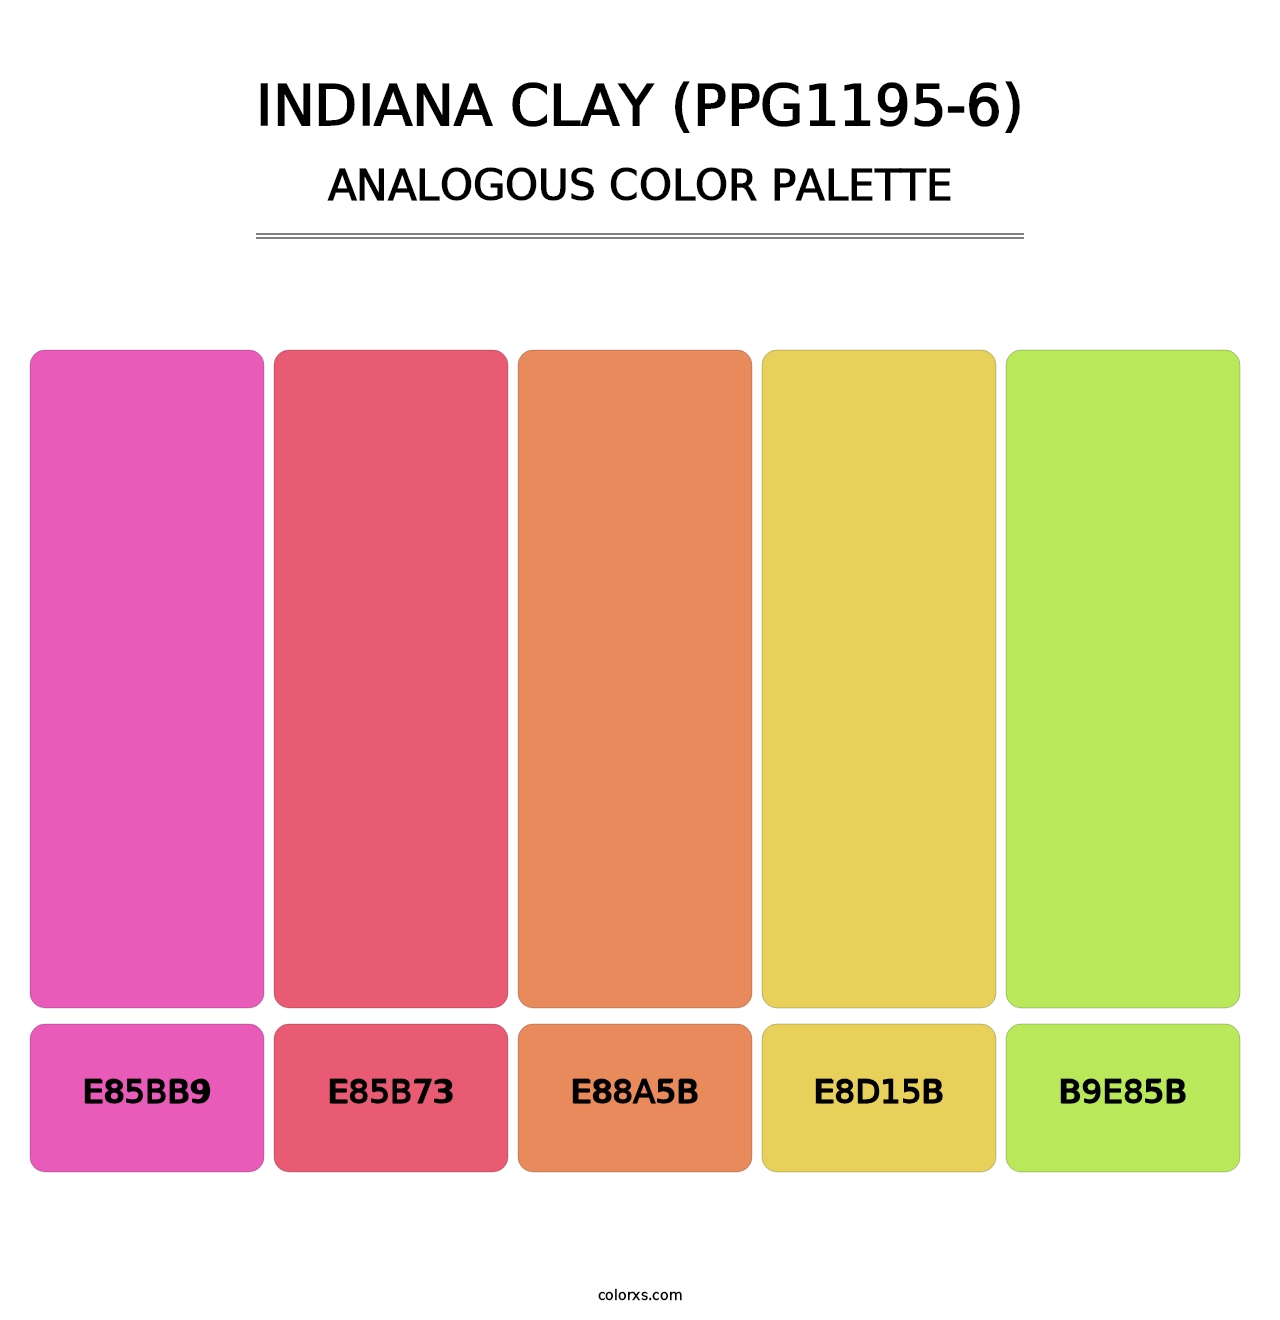 Indiana Clay (PPG1195-6) - Analogous Color Palette